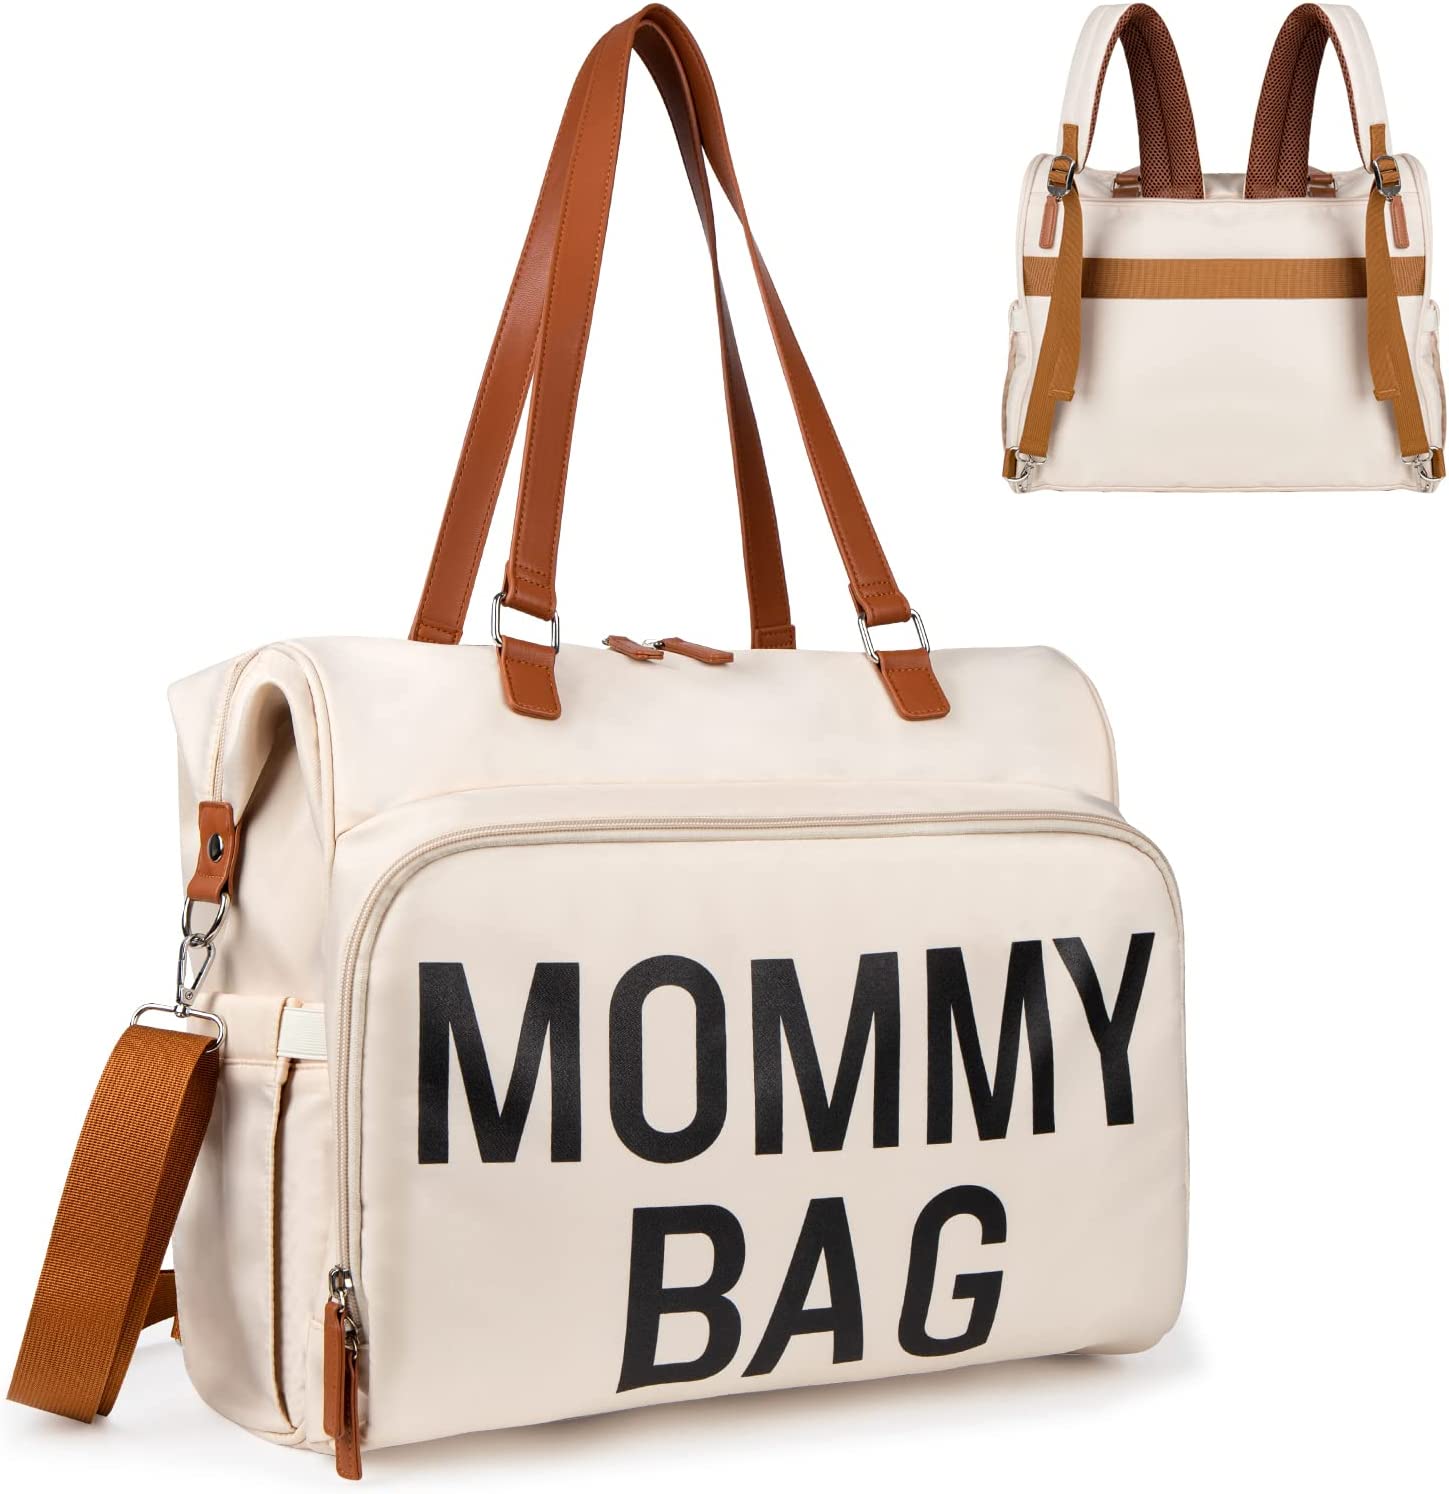  Houseables Mommy Bag, Hospital Bags for Labor and